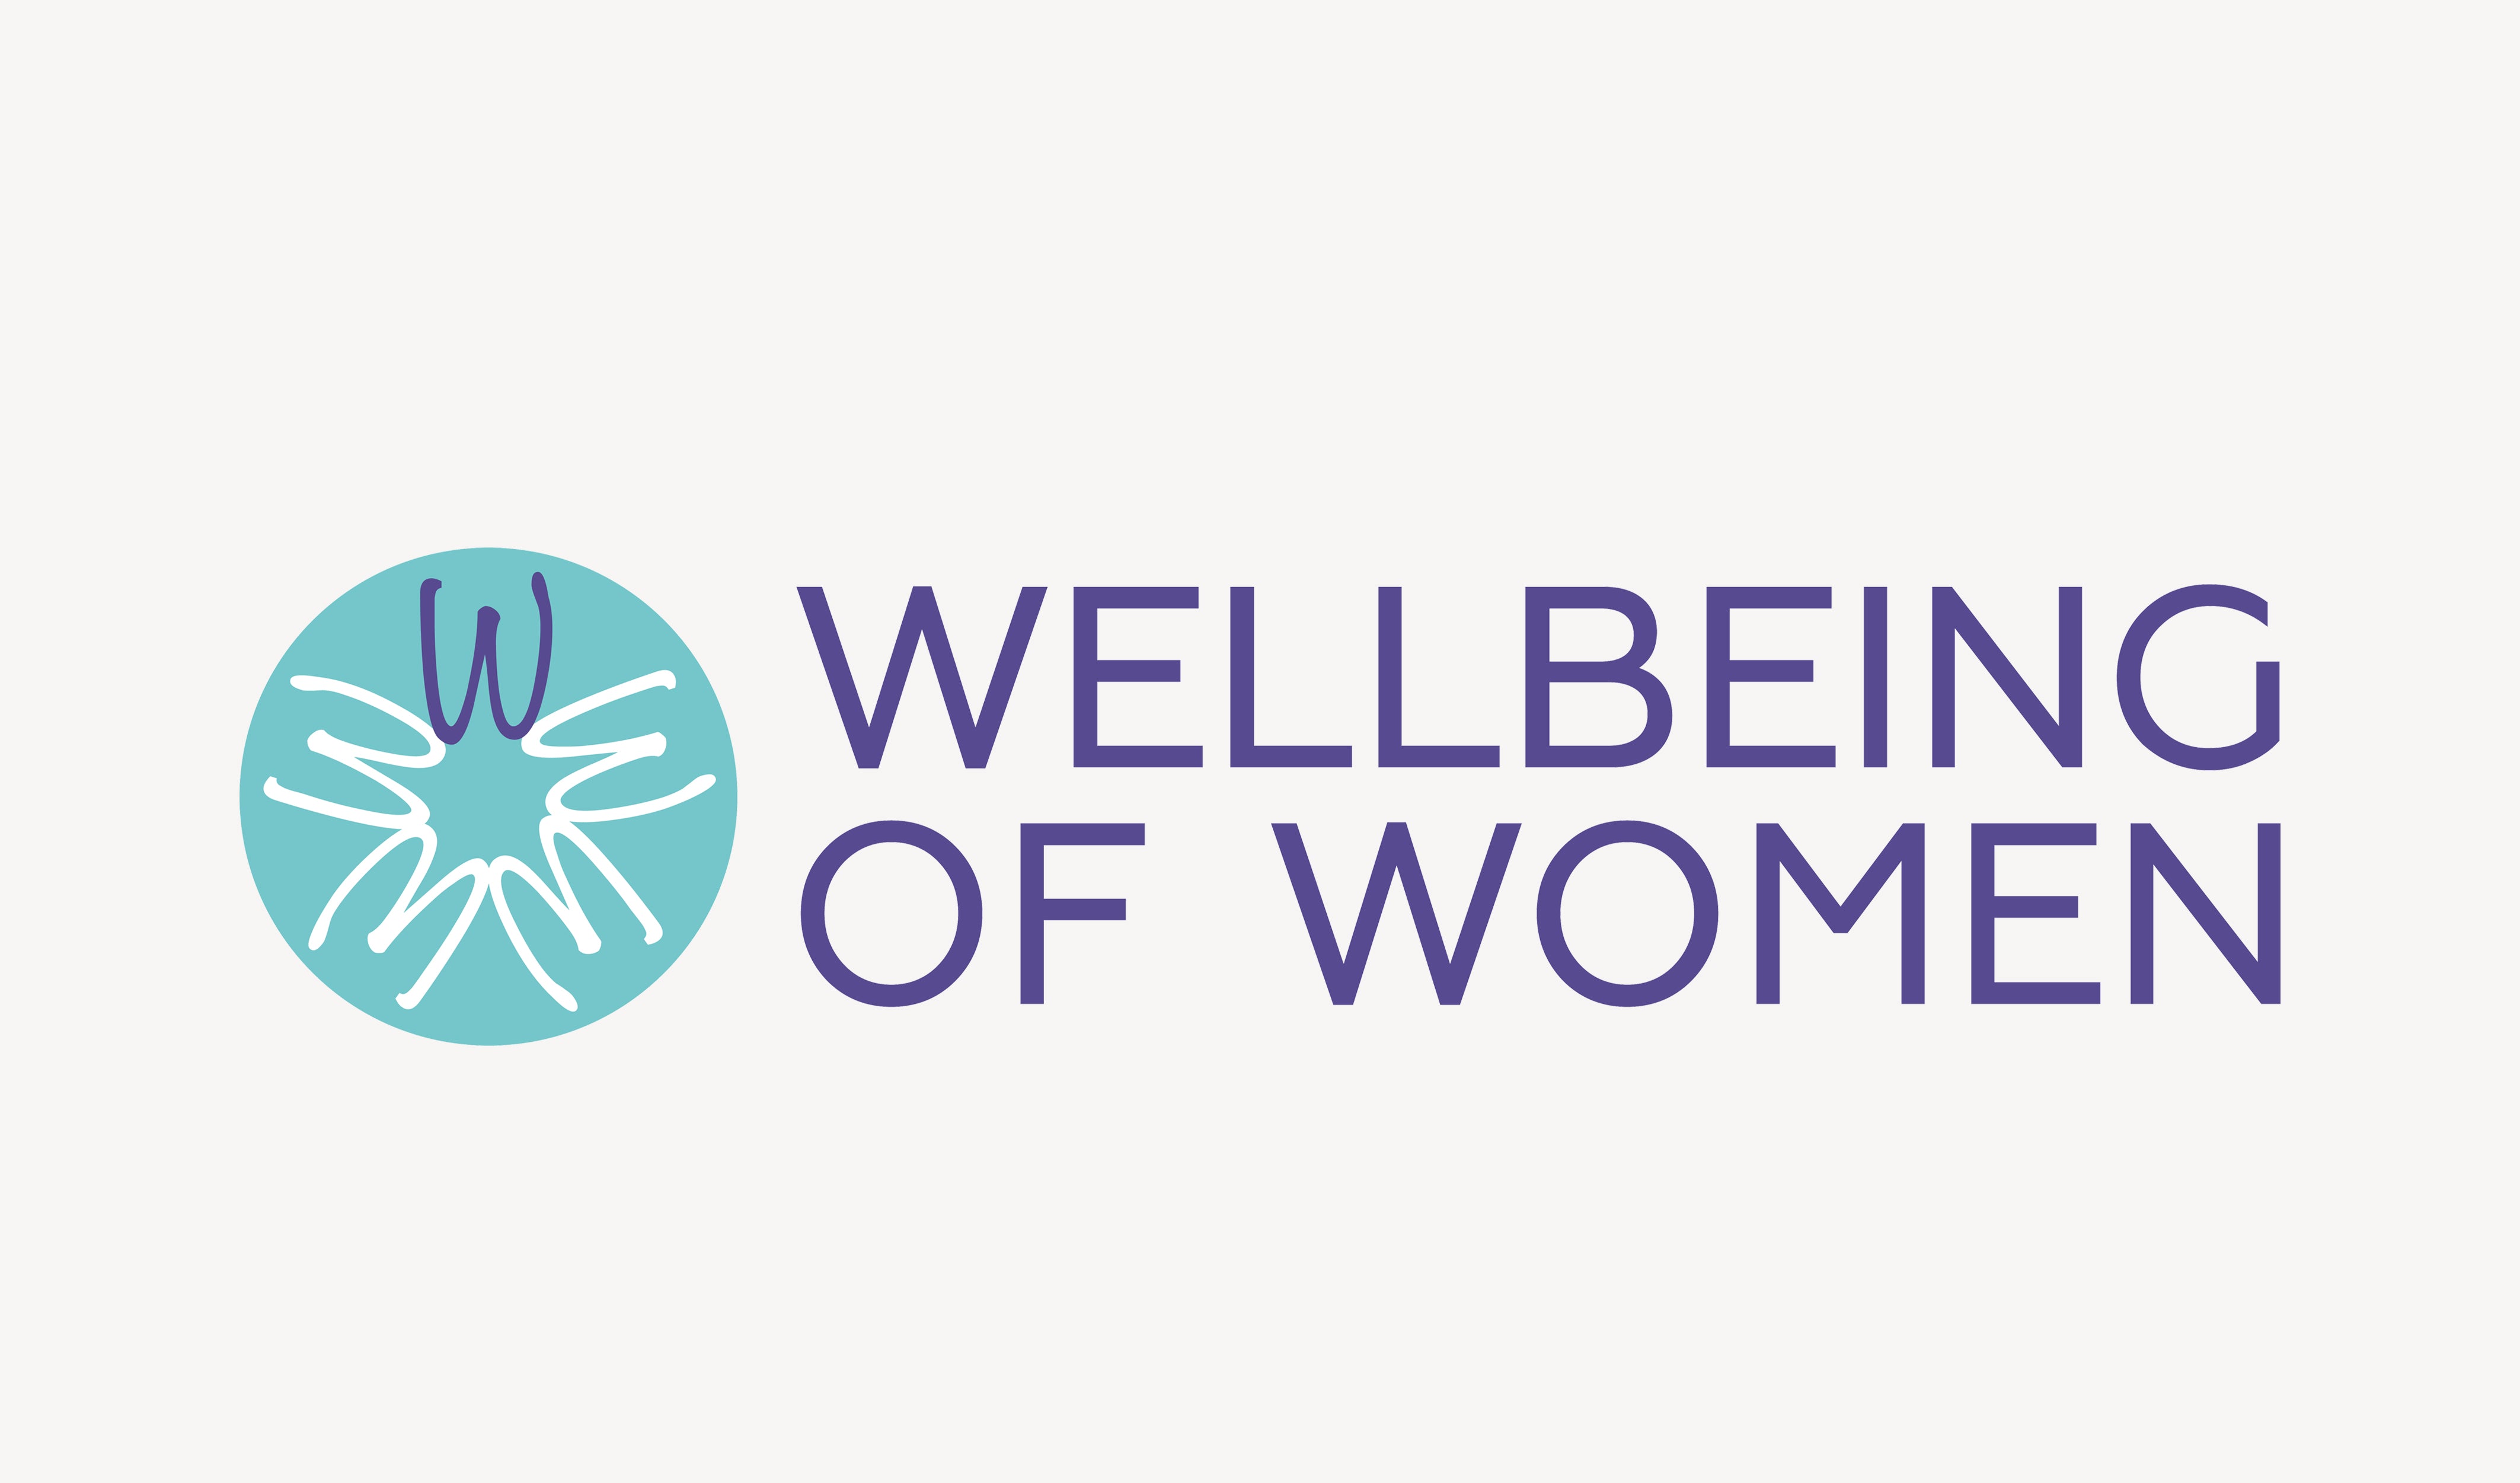 Q&A with Wellbeing of Women